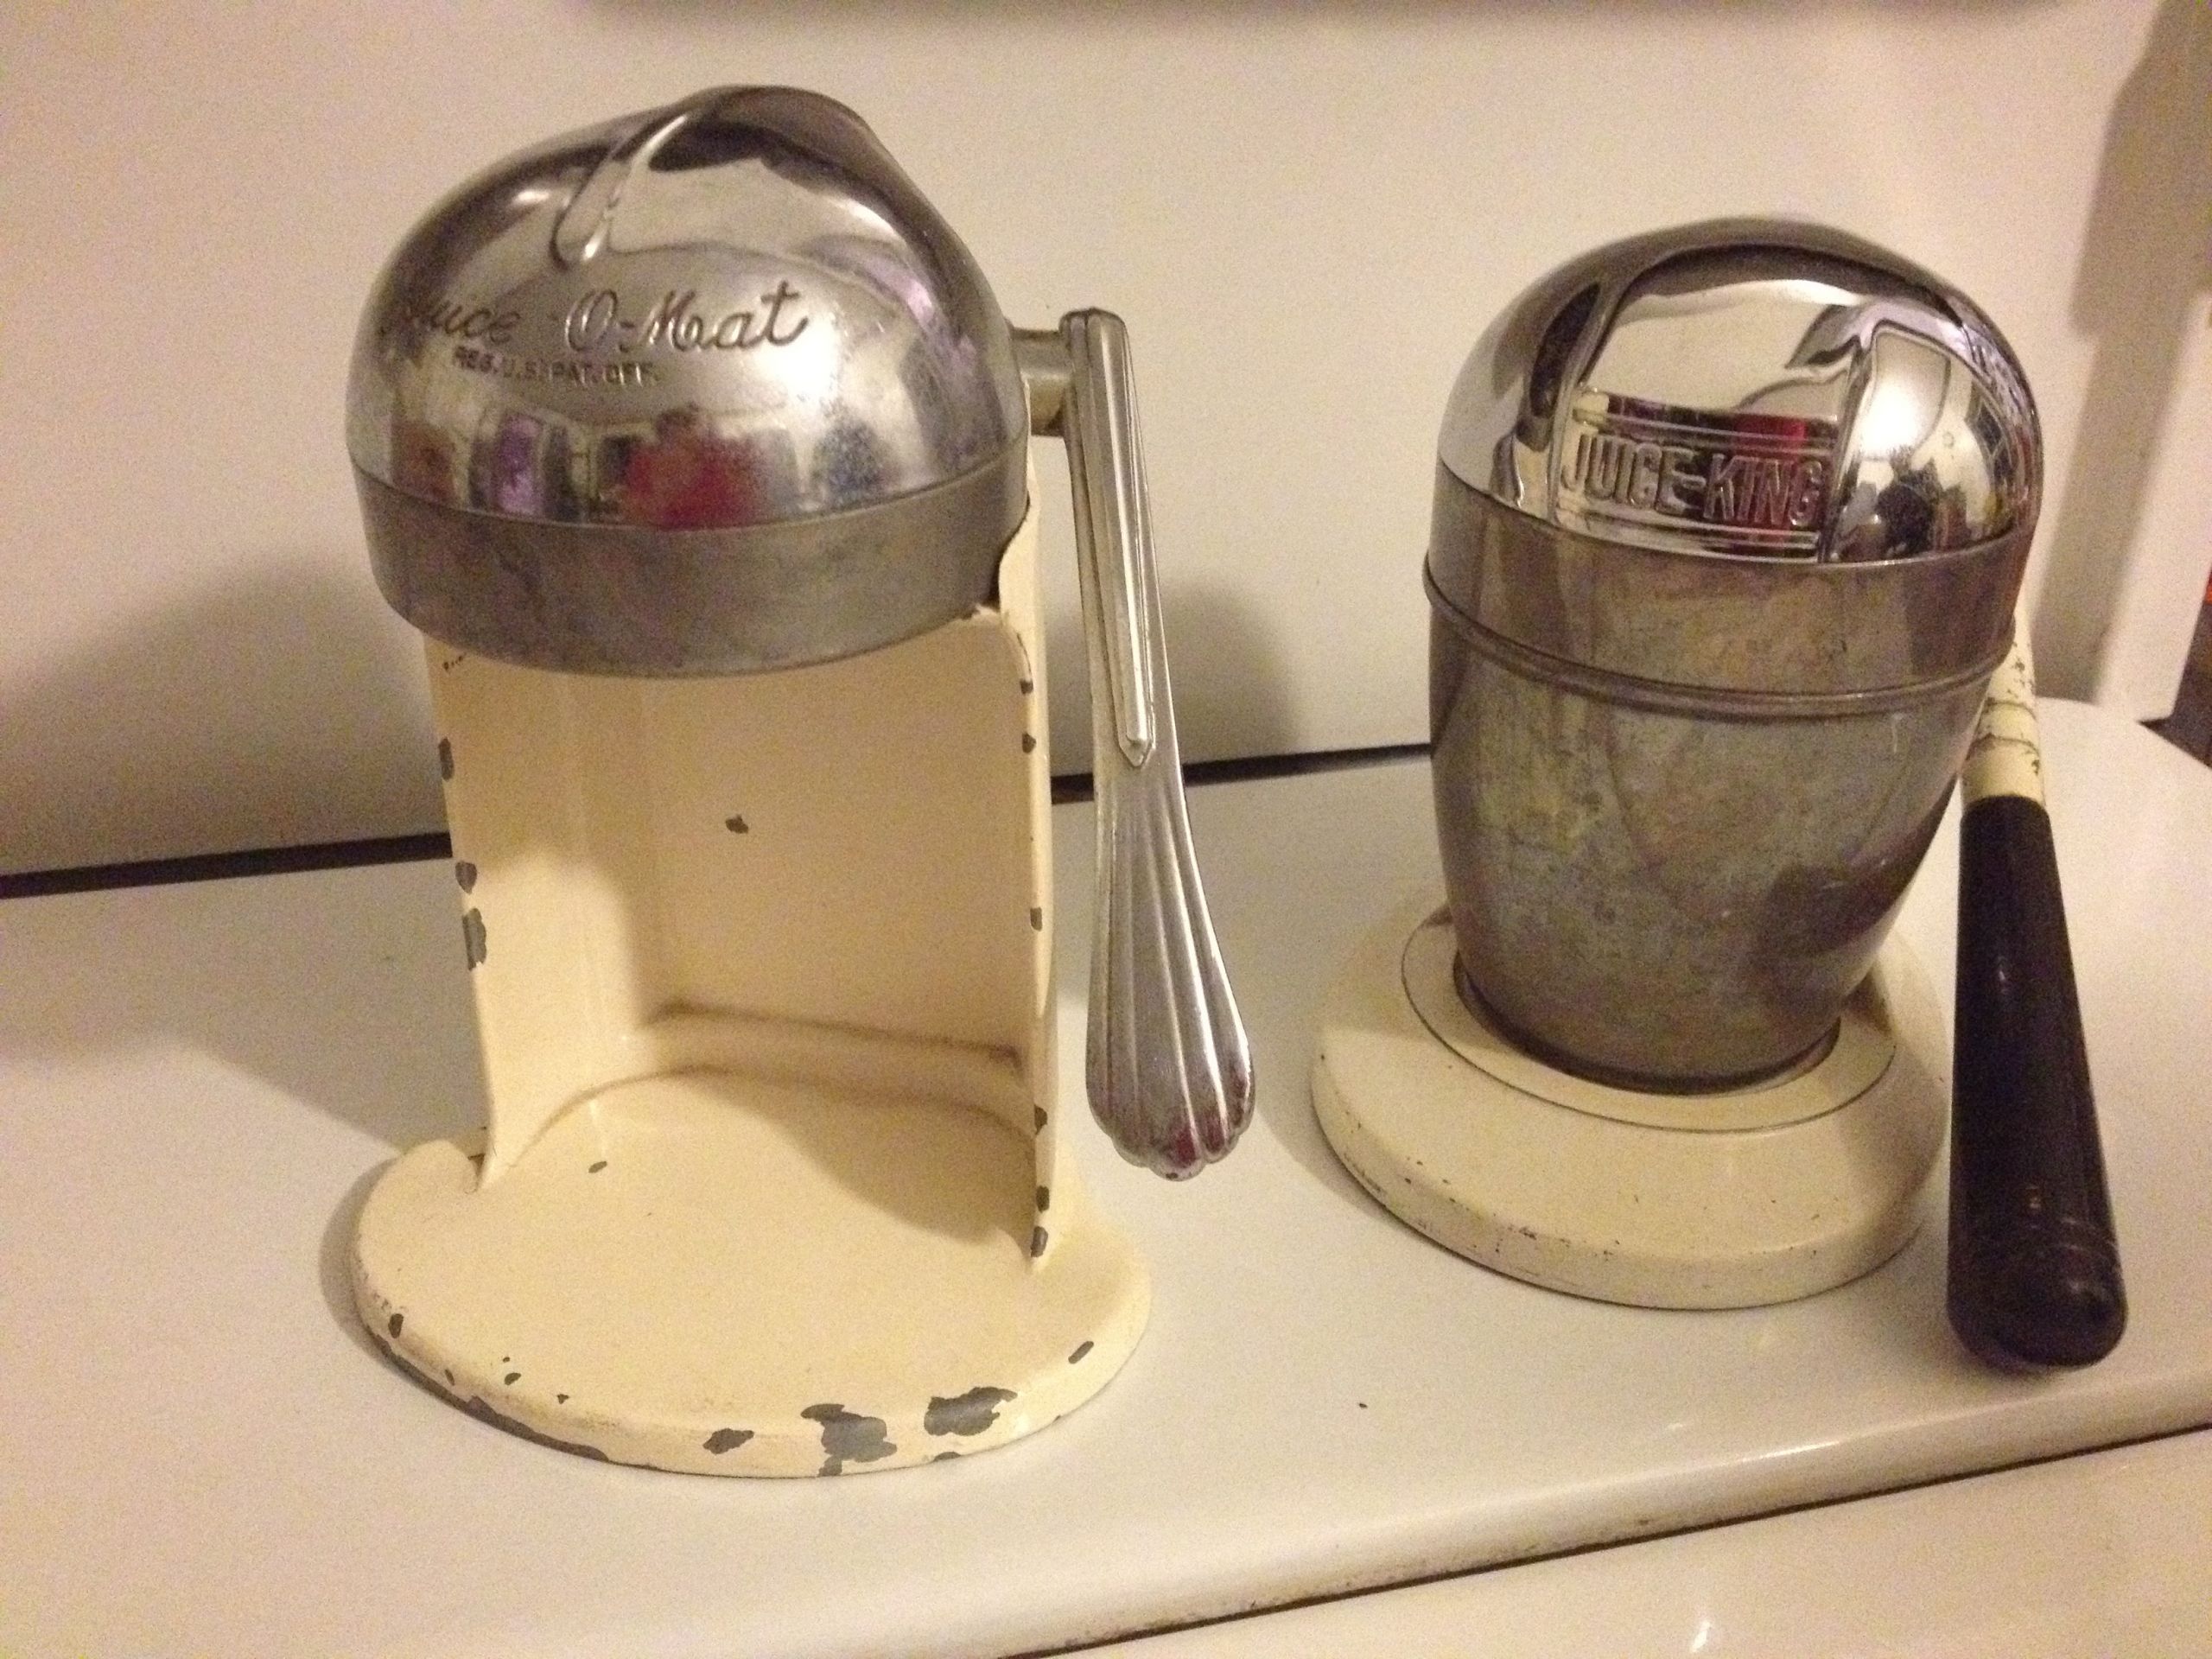 Retro Kitchen Small Appliances
 234 vintage small appliances in our picture gallery